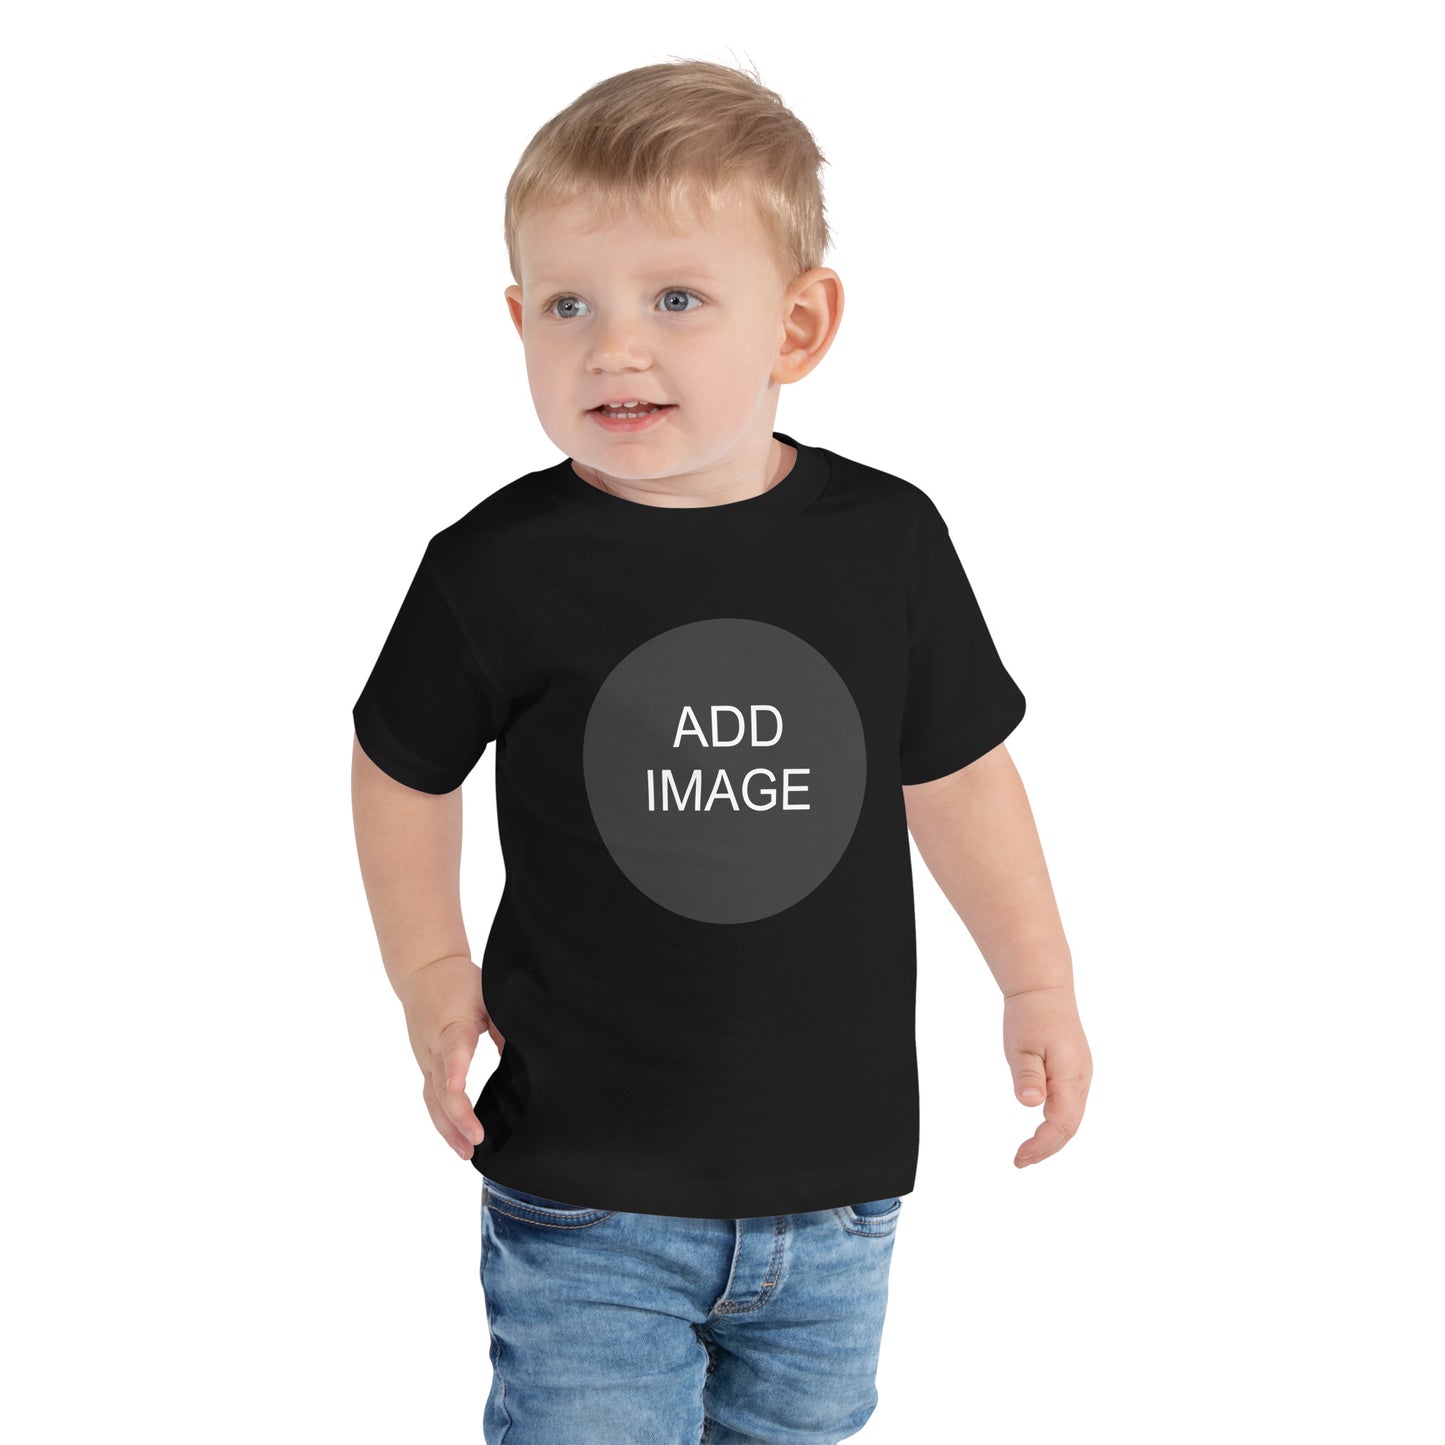 Toddler Short Sleeve Tee 2T-5T (front image, back text)